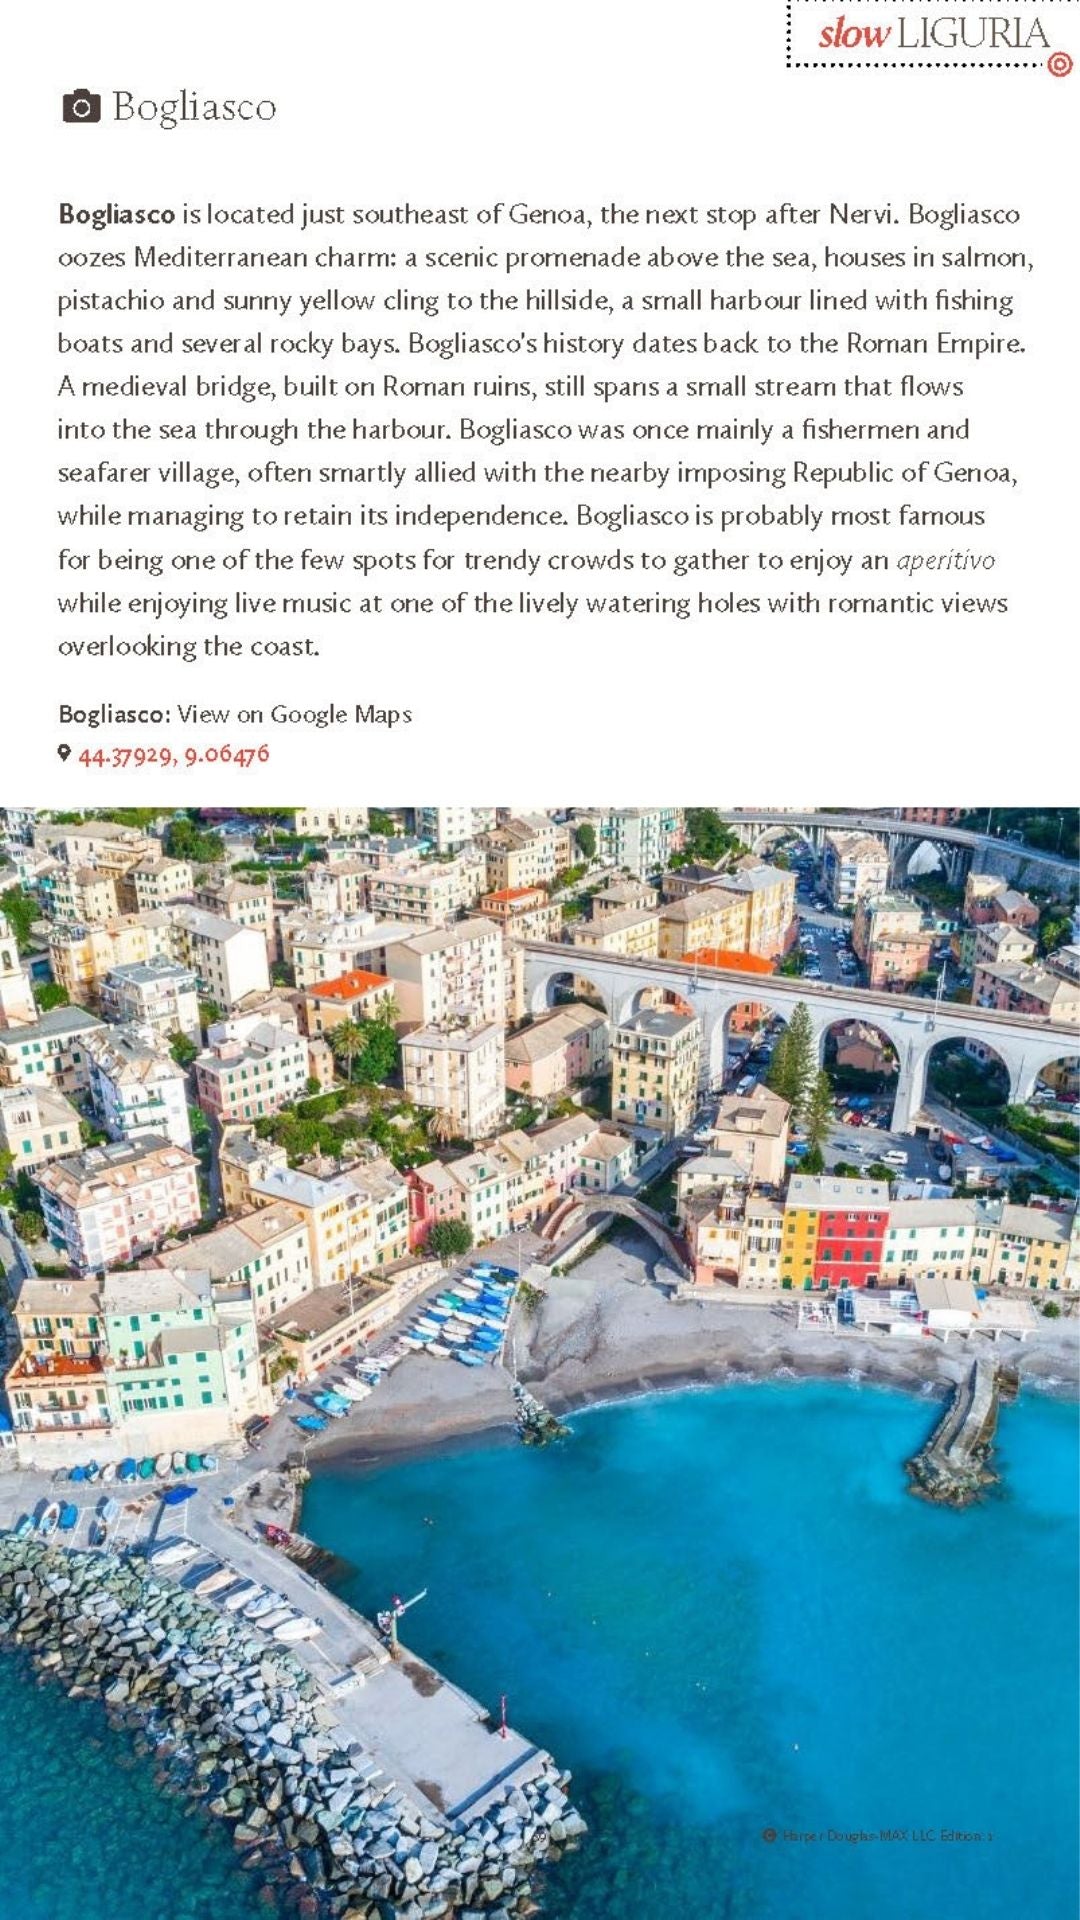 SlowItaly App-book Itinerary LIGURIA V 1.1 for Mobile English